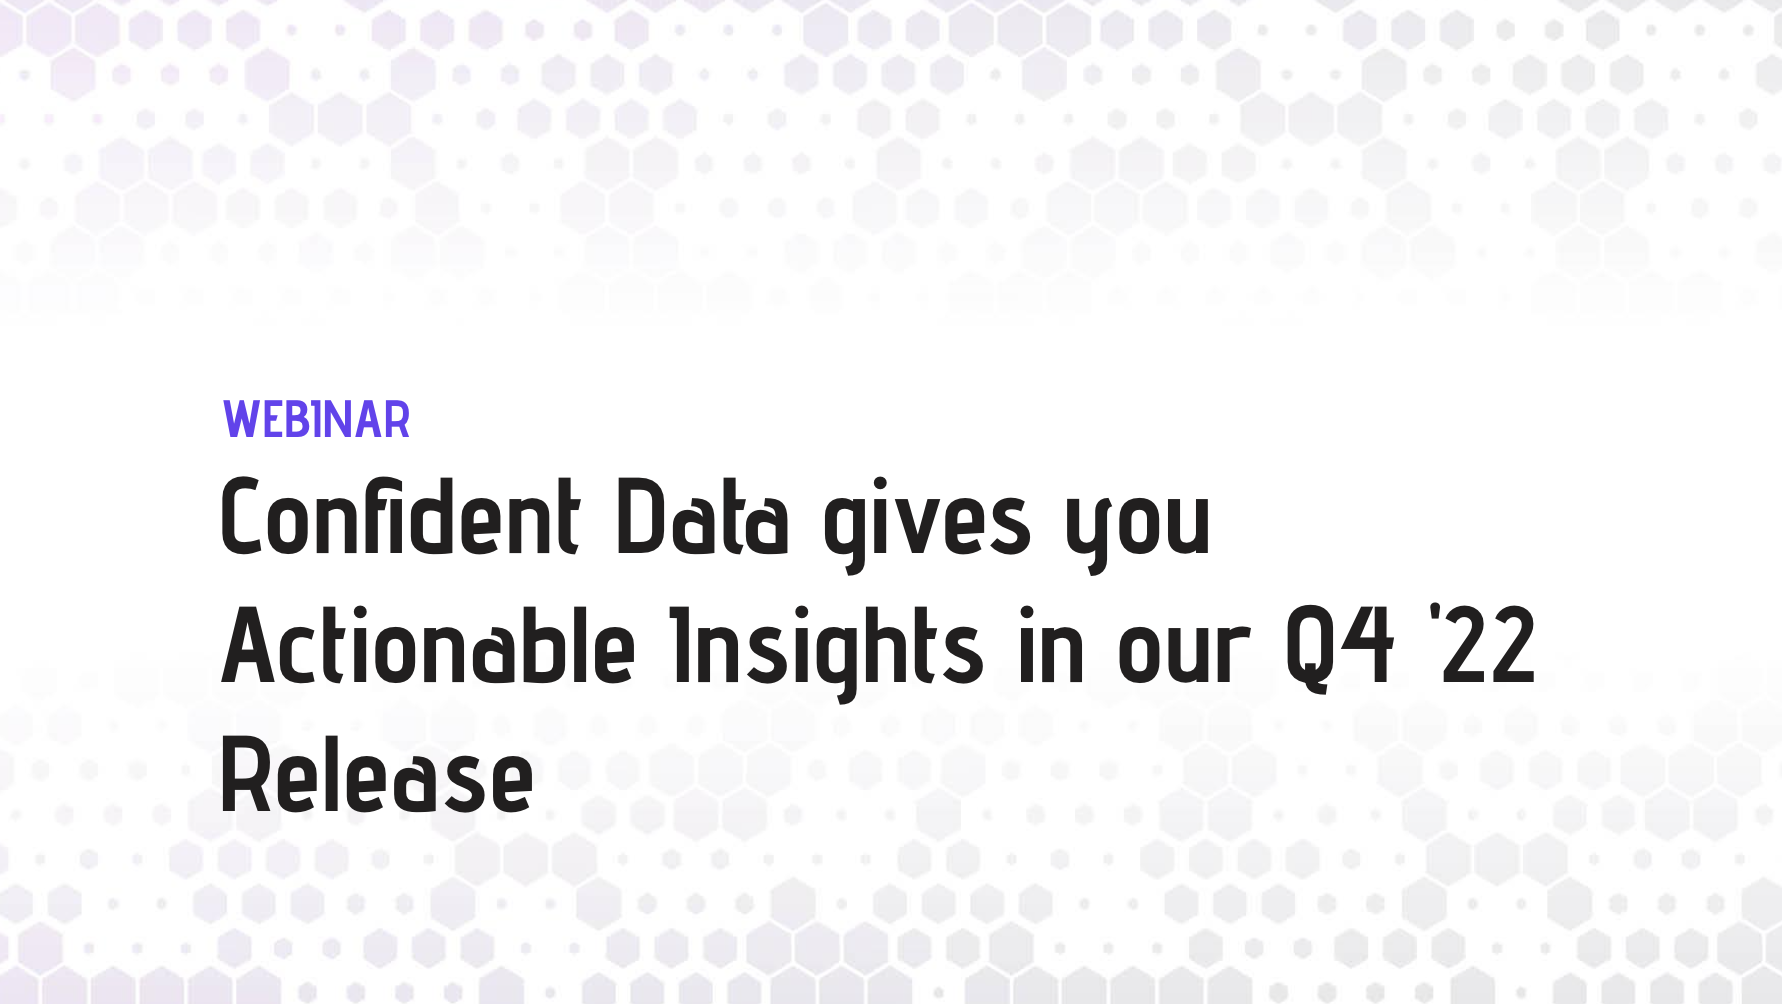 Confident Data gives you Actionable Insights in our Q4 '22 Release